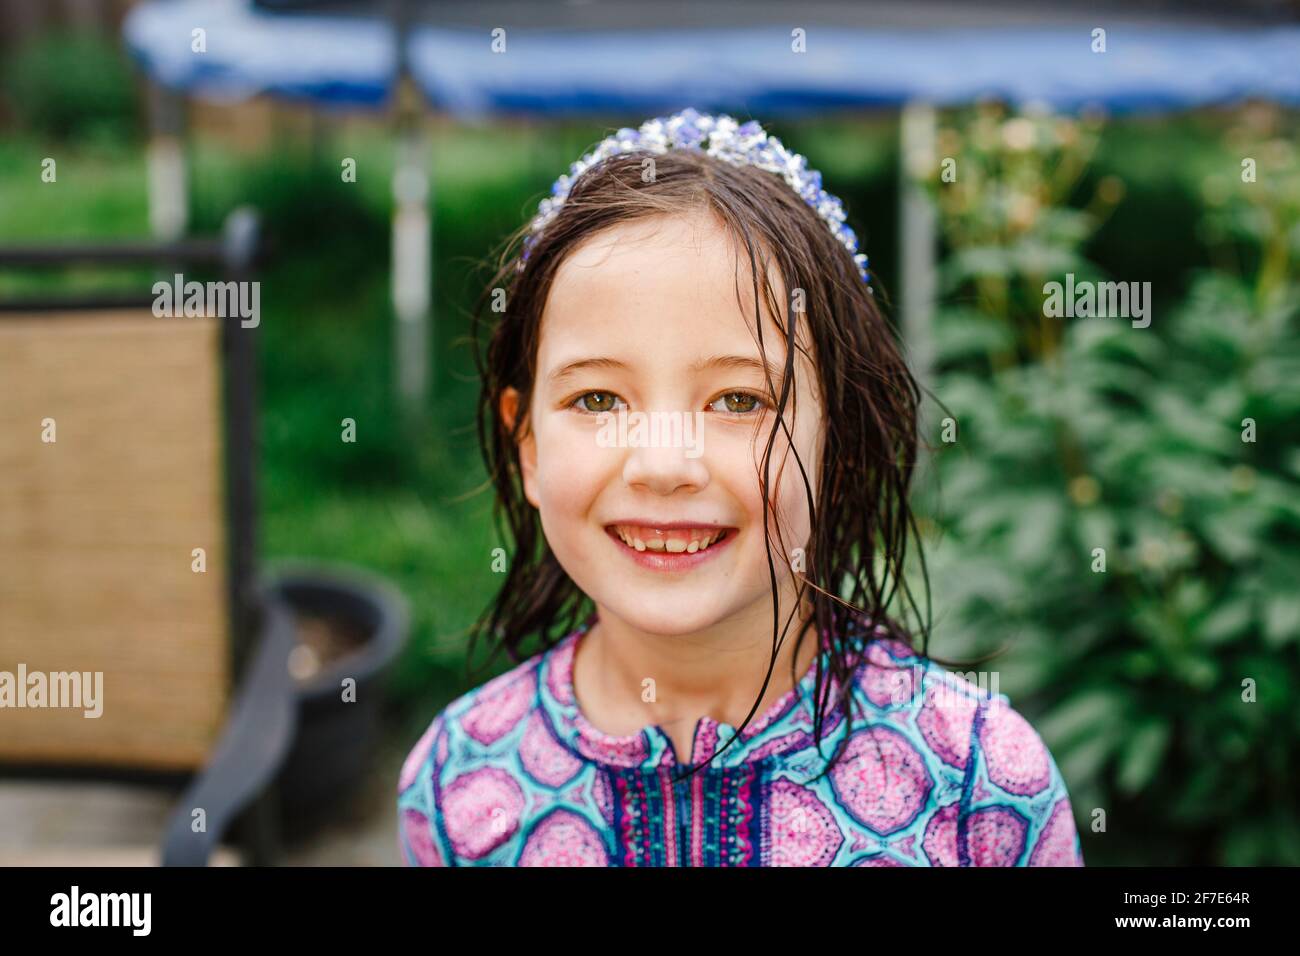 A smiling child stands with direct gaze, wet hair, and a purple crown Stock Photo